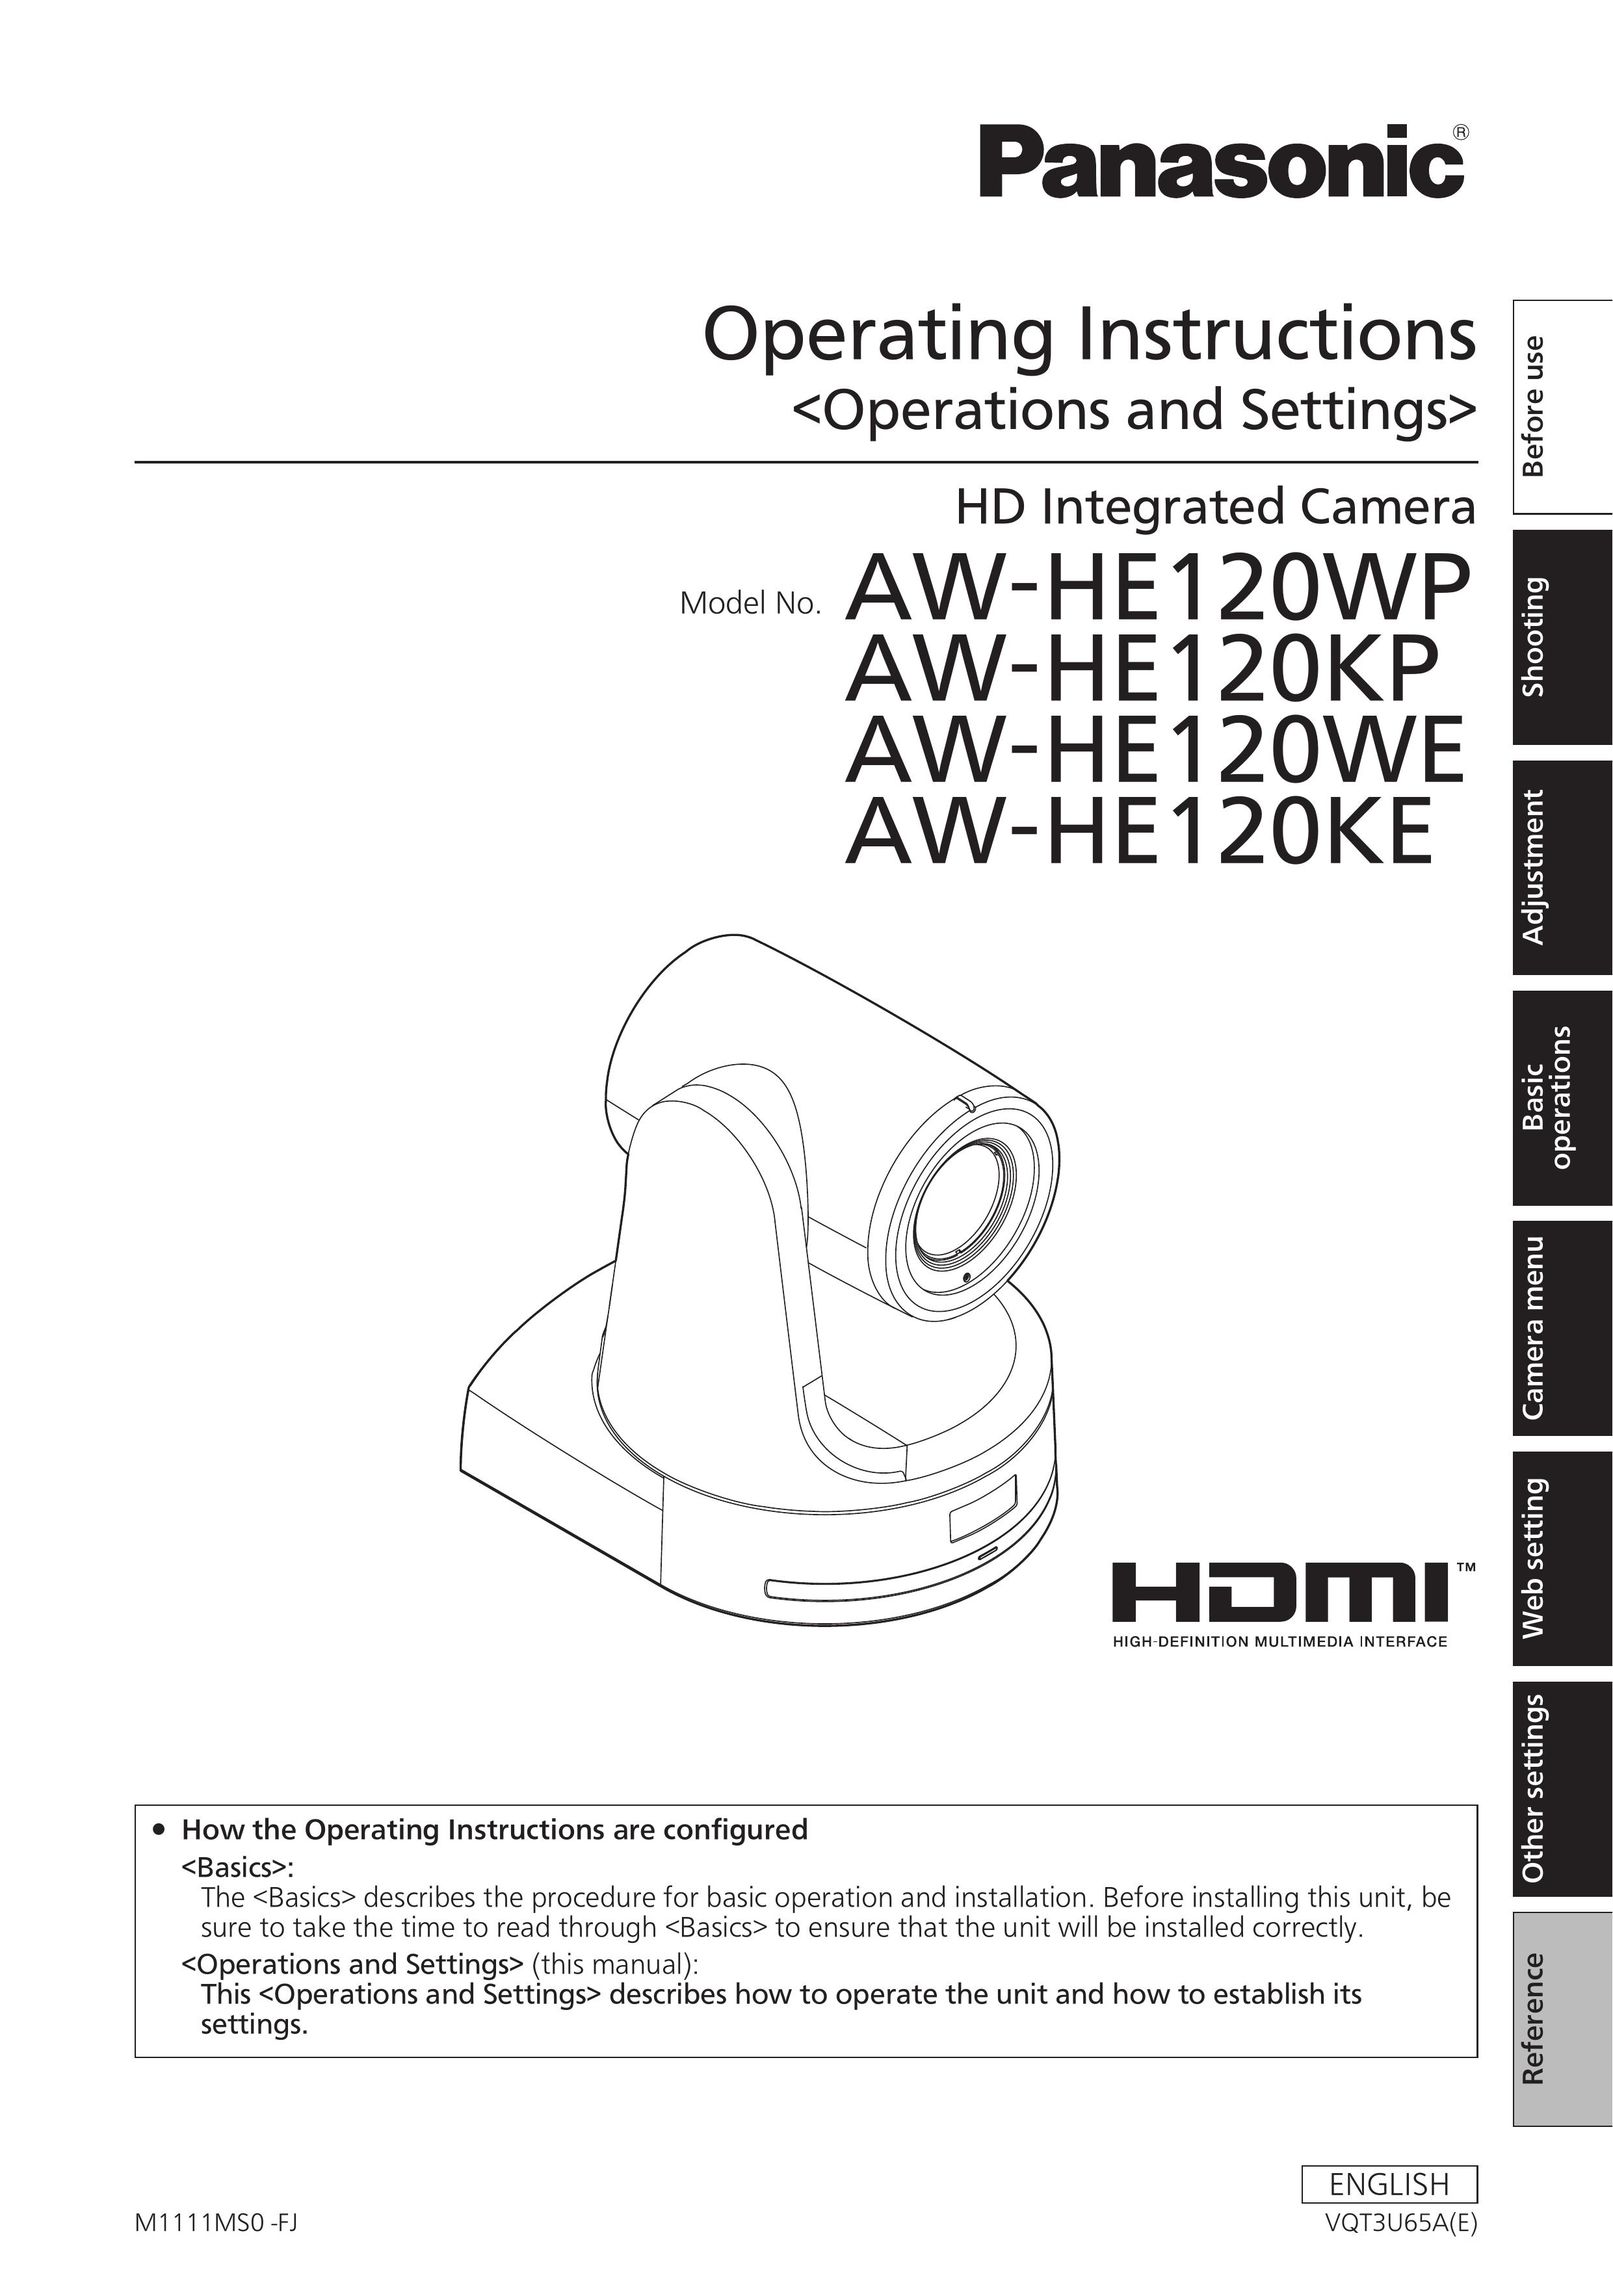 Panasonic AW-HS50 Home Security System User Manual